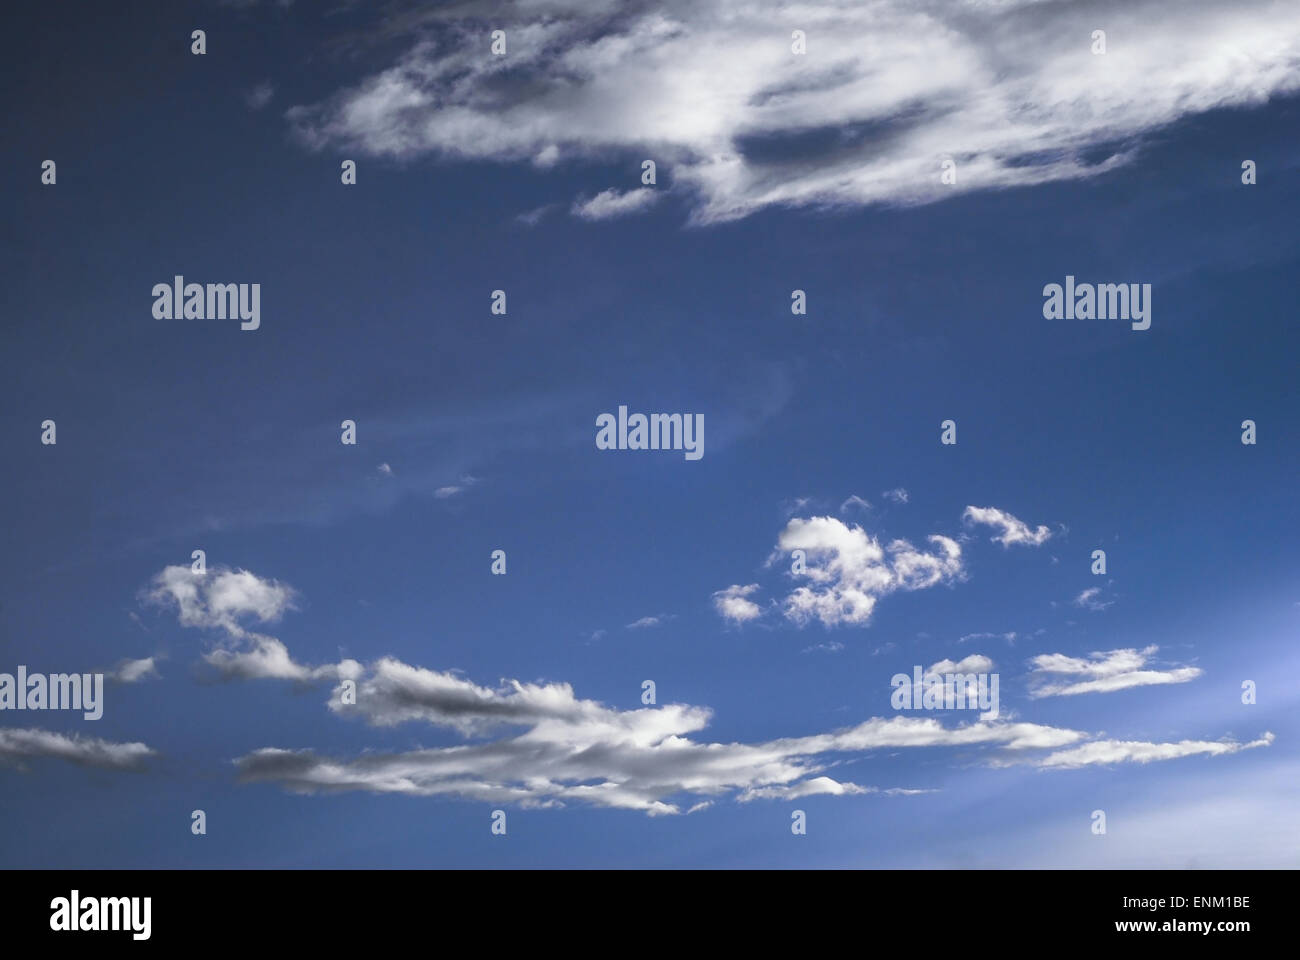 dark clear sky with clouds Stock Photo